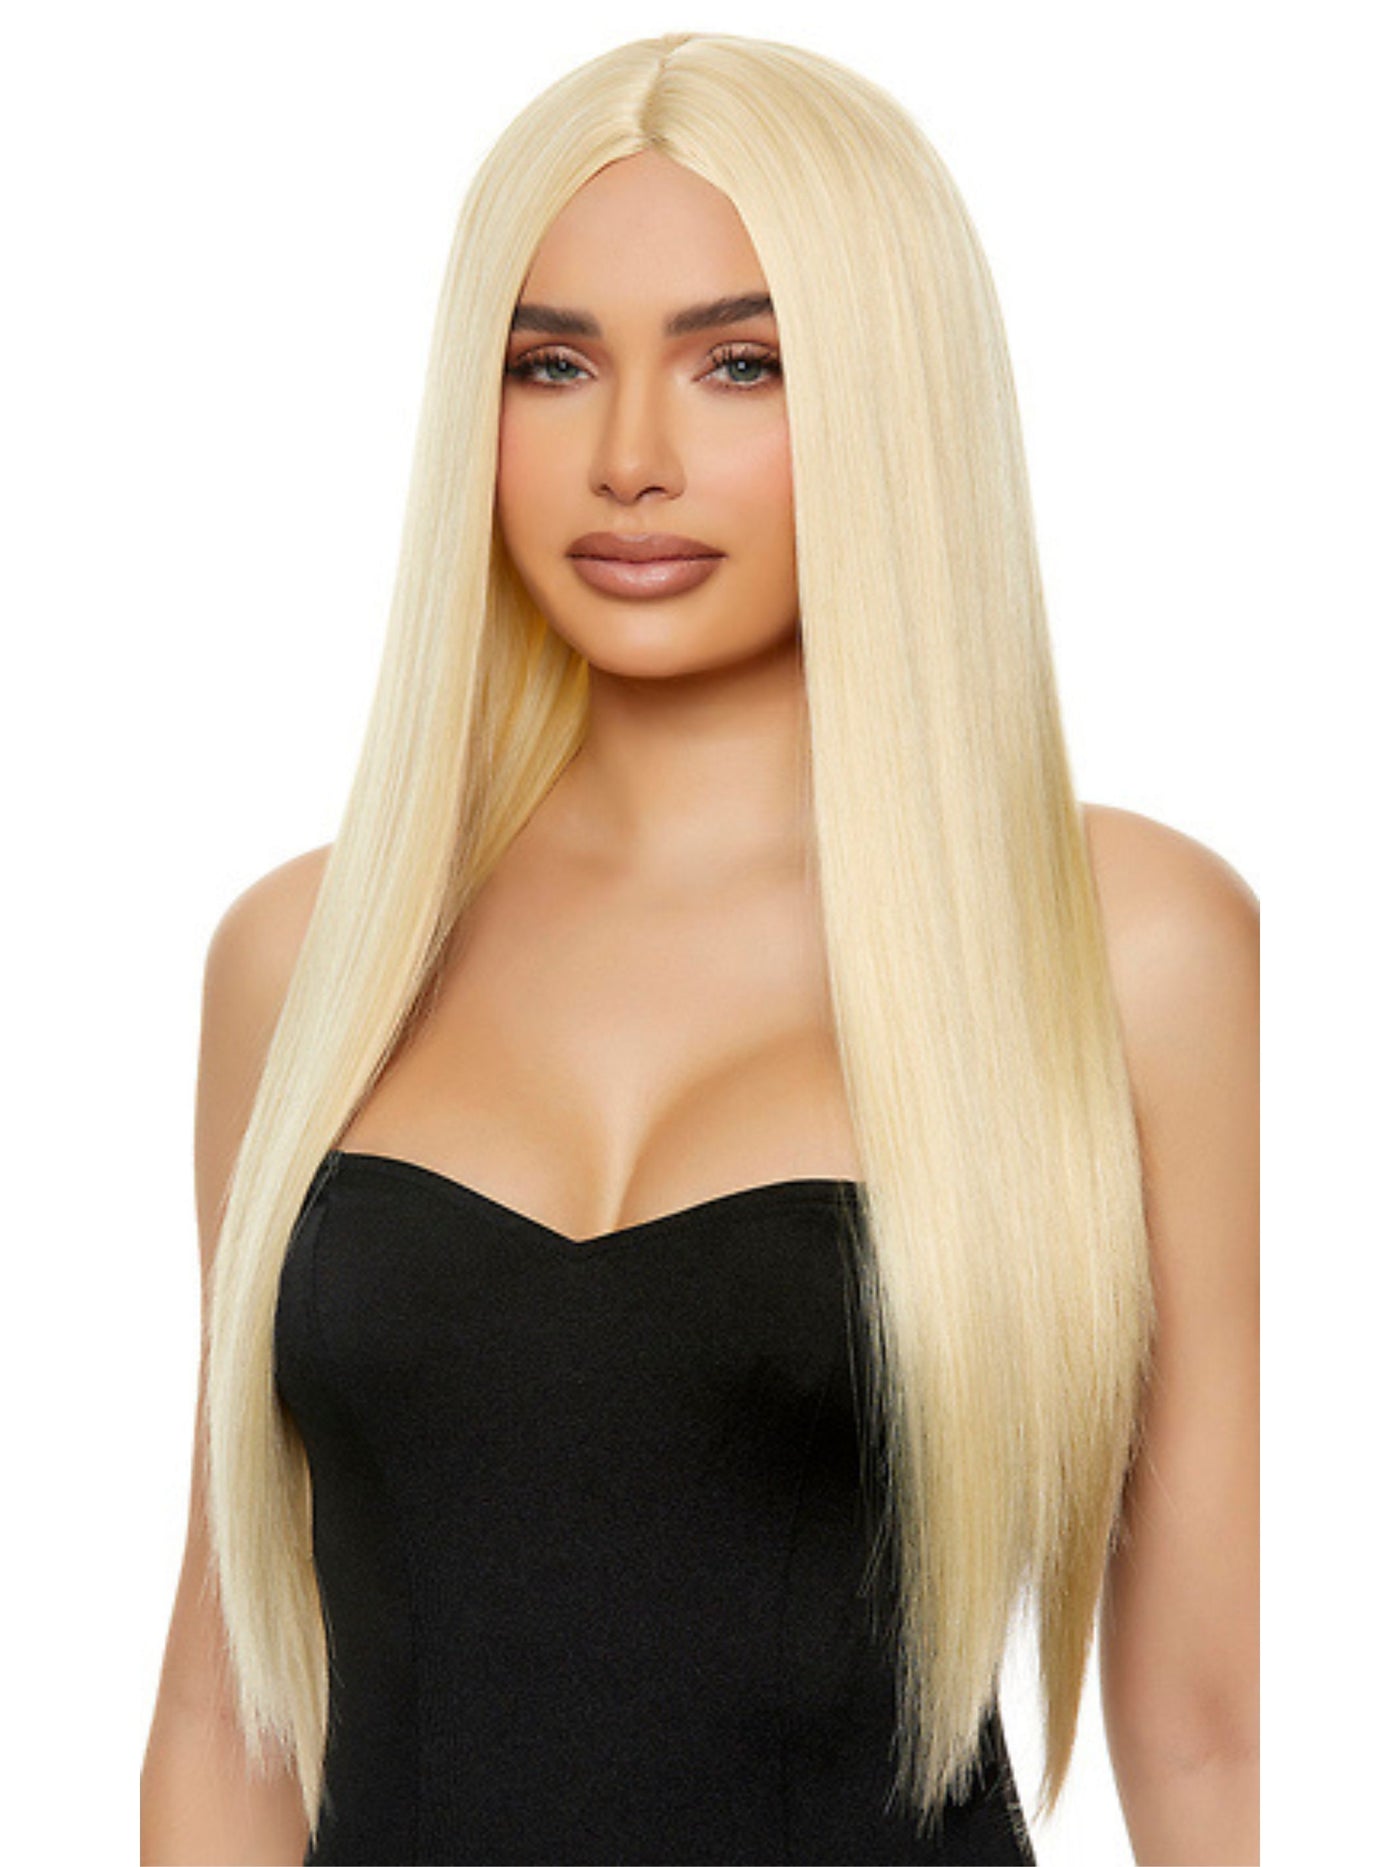 Ice Cold White Extra Long Straight Blonde Costume Wig